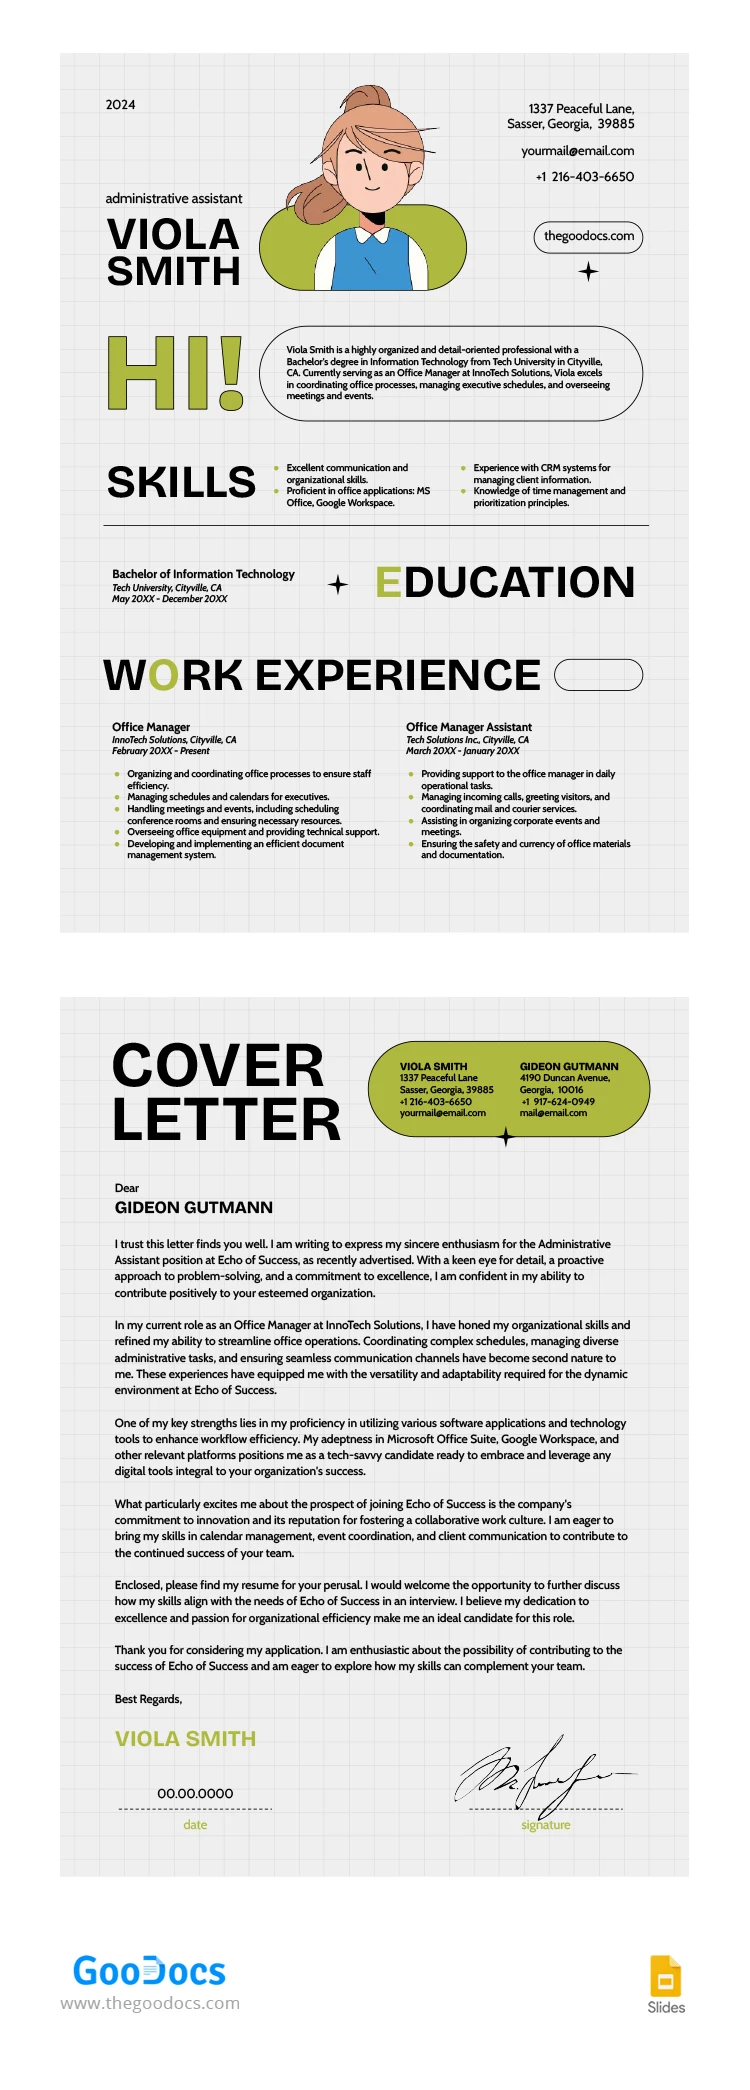 Resume Cover Letter For Administrative Assistant - free Google Docs Template - 10067951